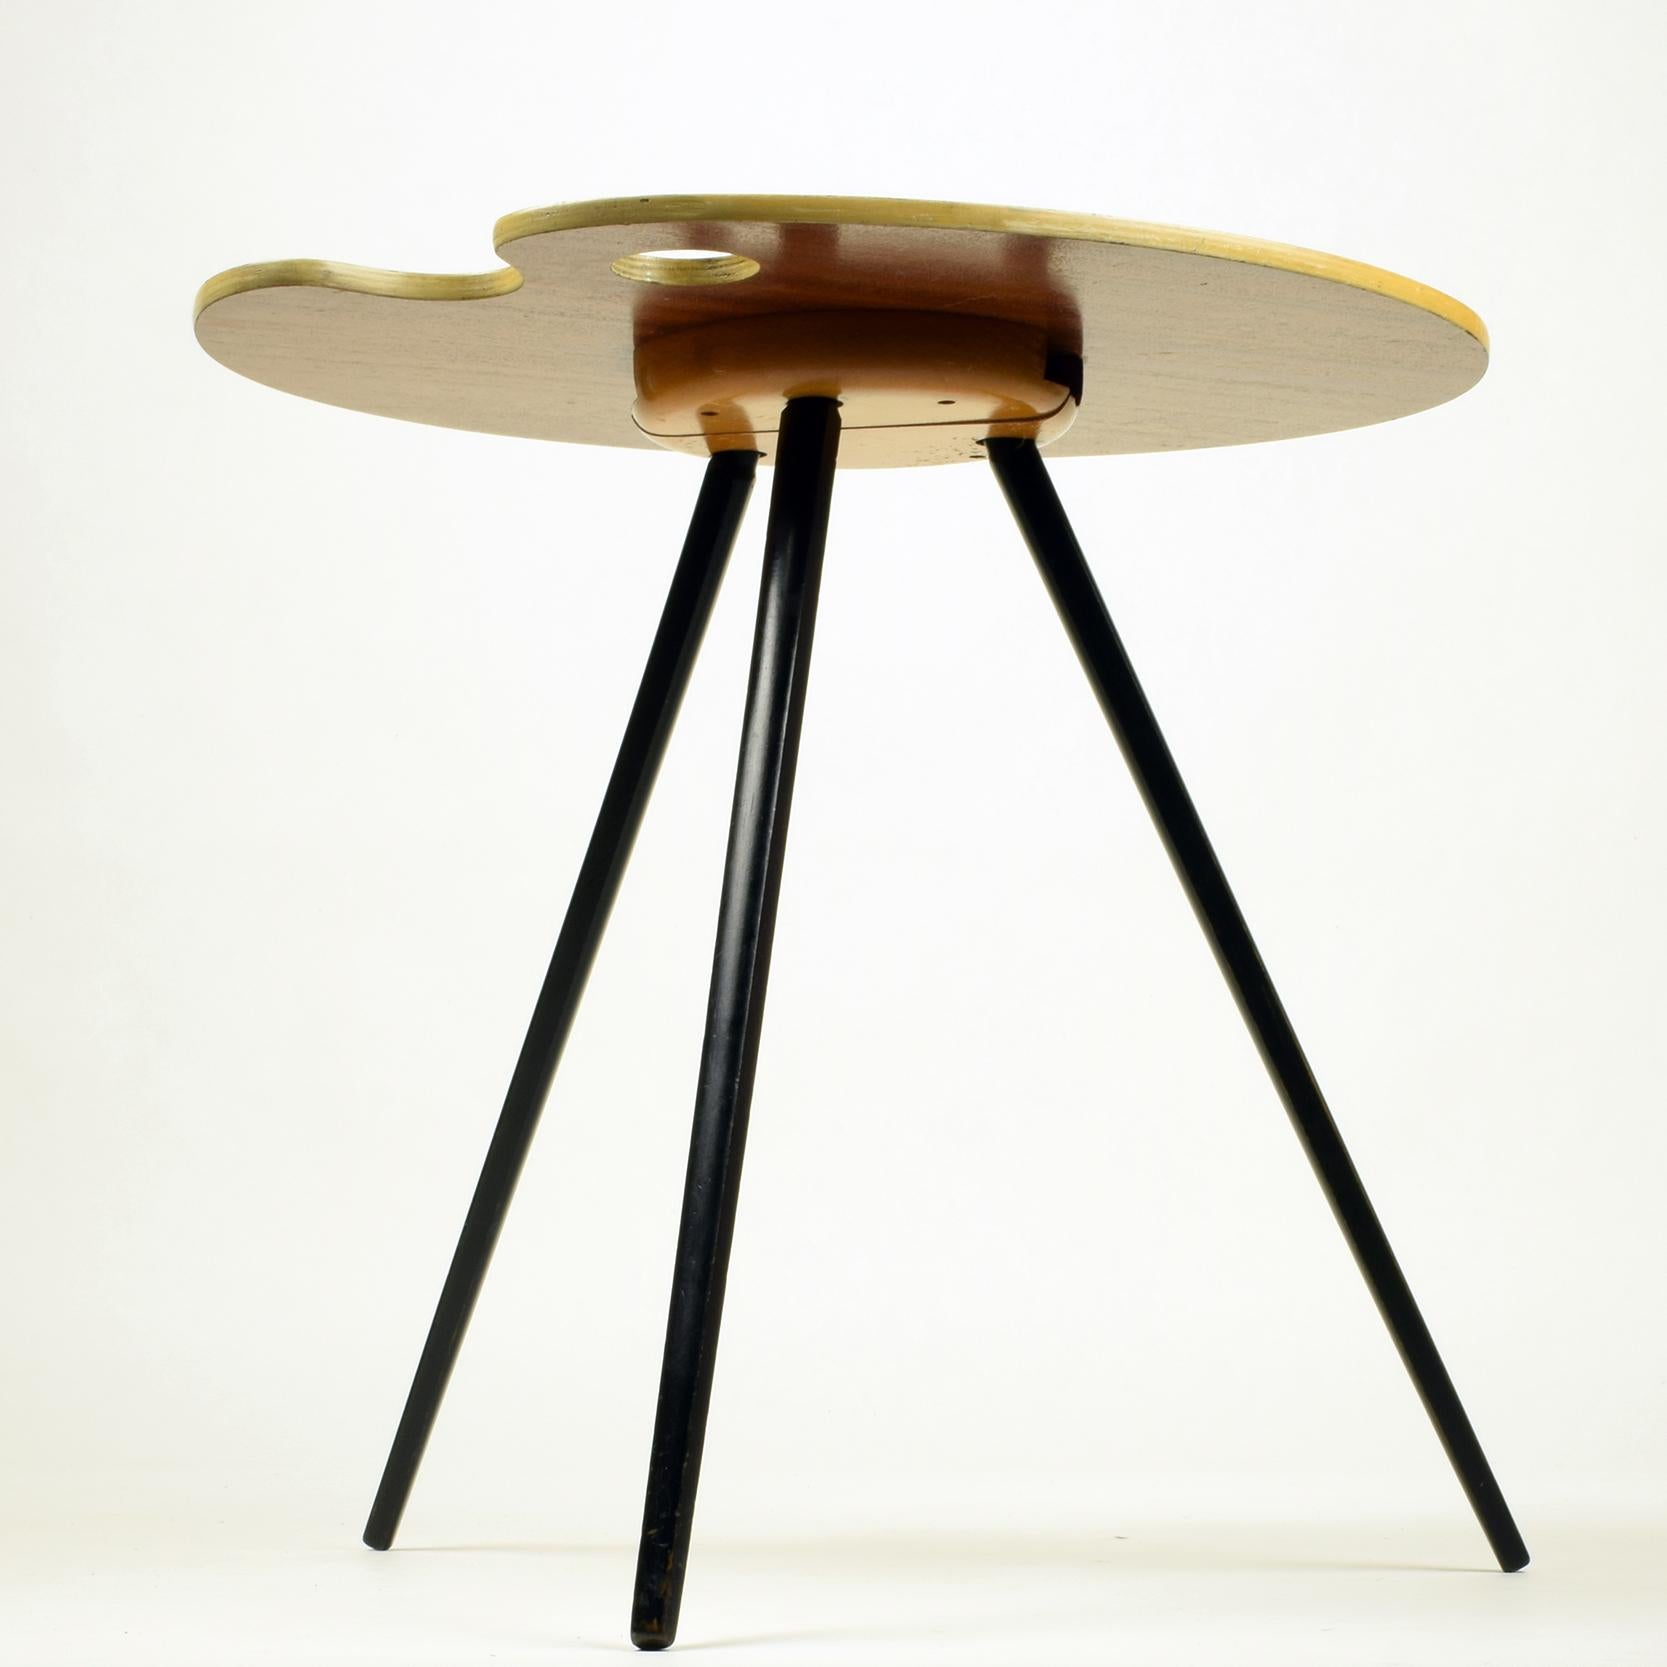 British 1950s Artist's Palette Side Table in the Style of Lucien de Roeck For Sale